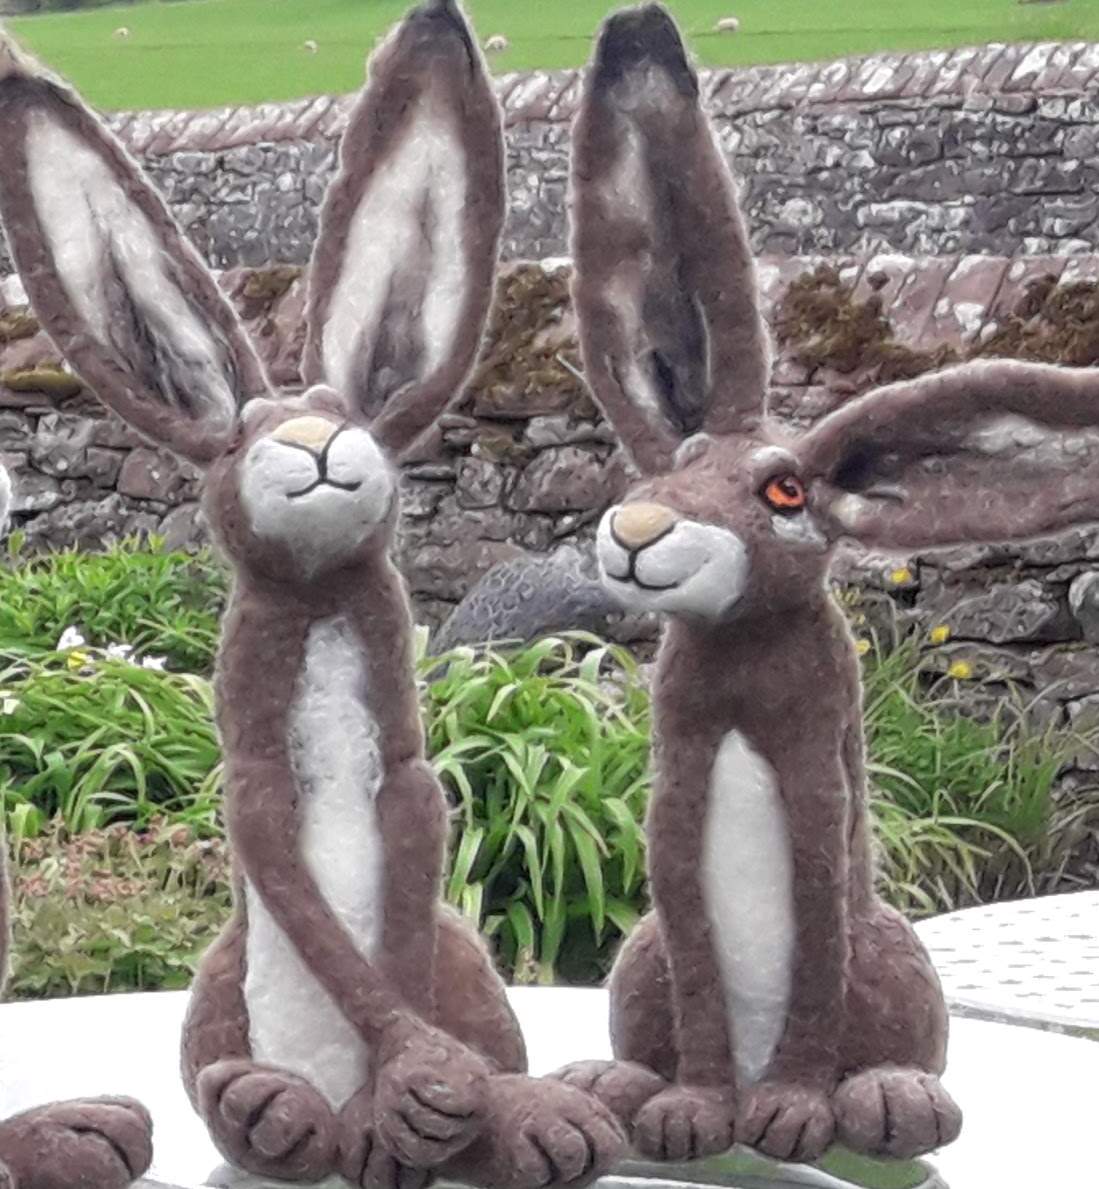 Needle Felt Hare Workshop with Annis McGowan in Cumbria